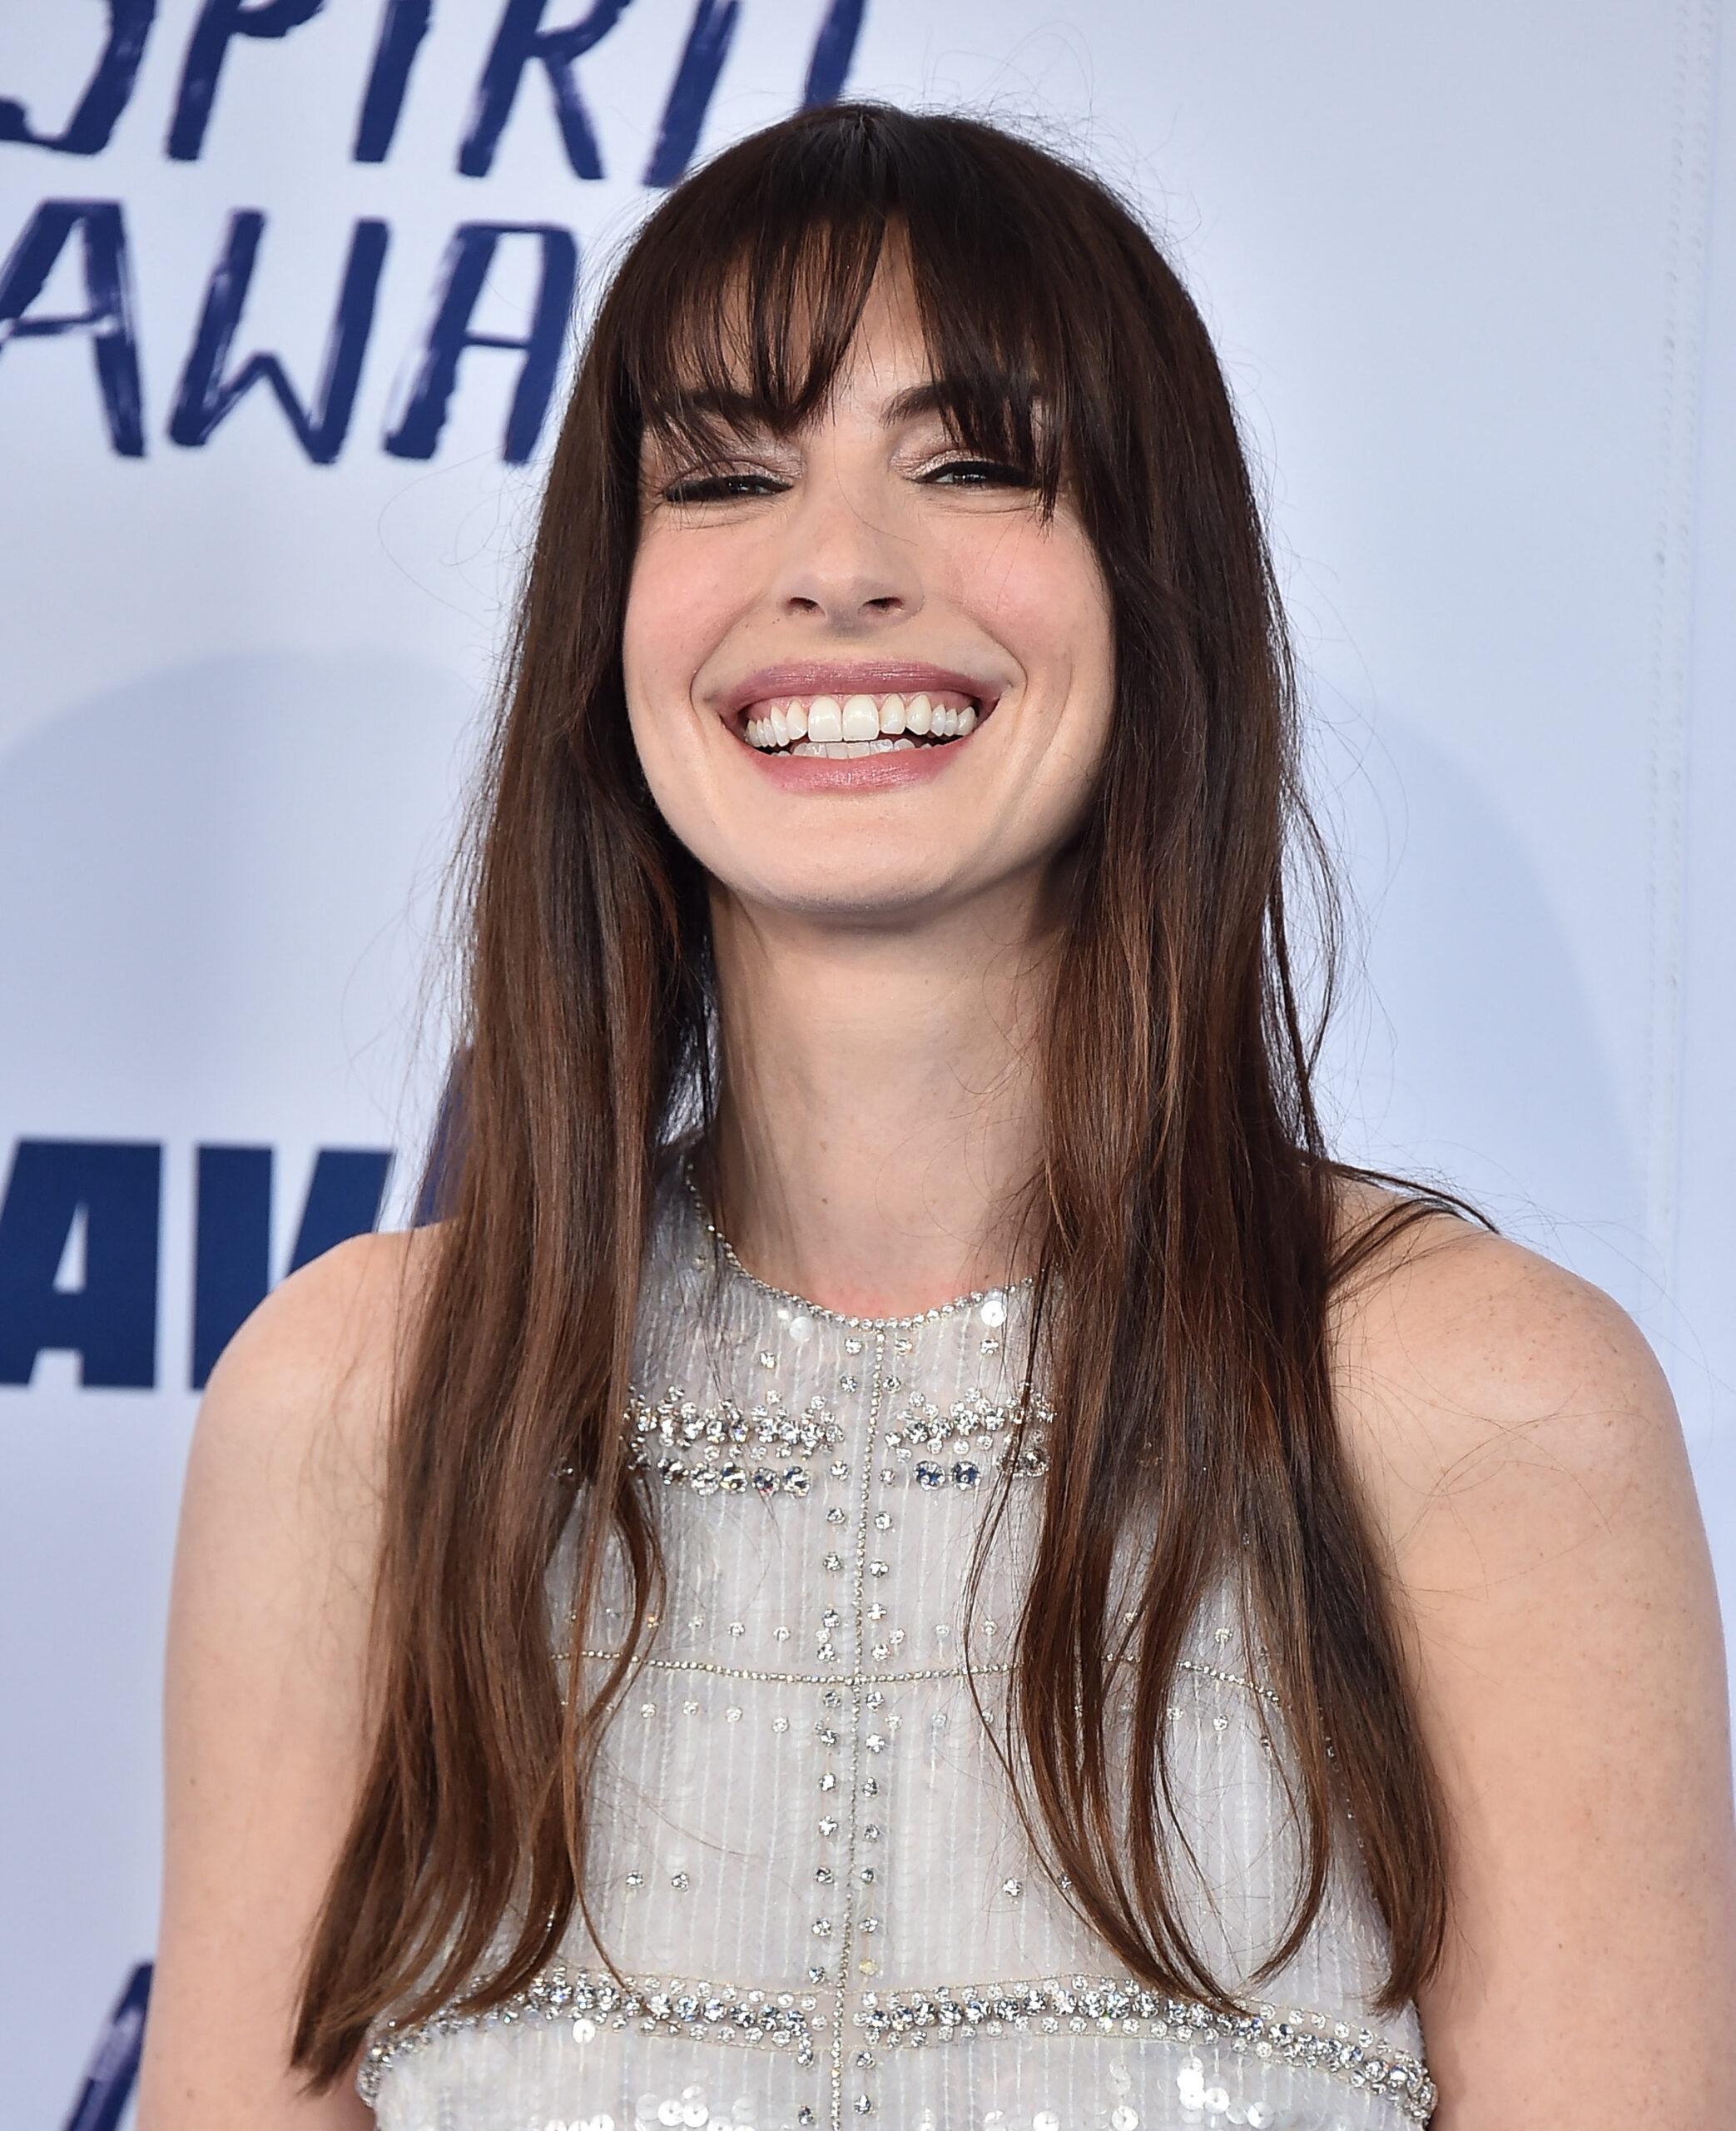 Anne Hathaway Reveals Huge Milestone: 'I'm Over 5 Years Sober'